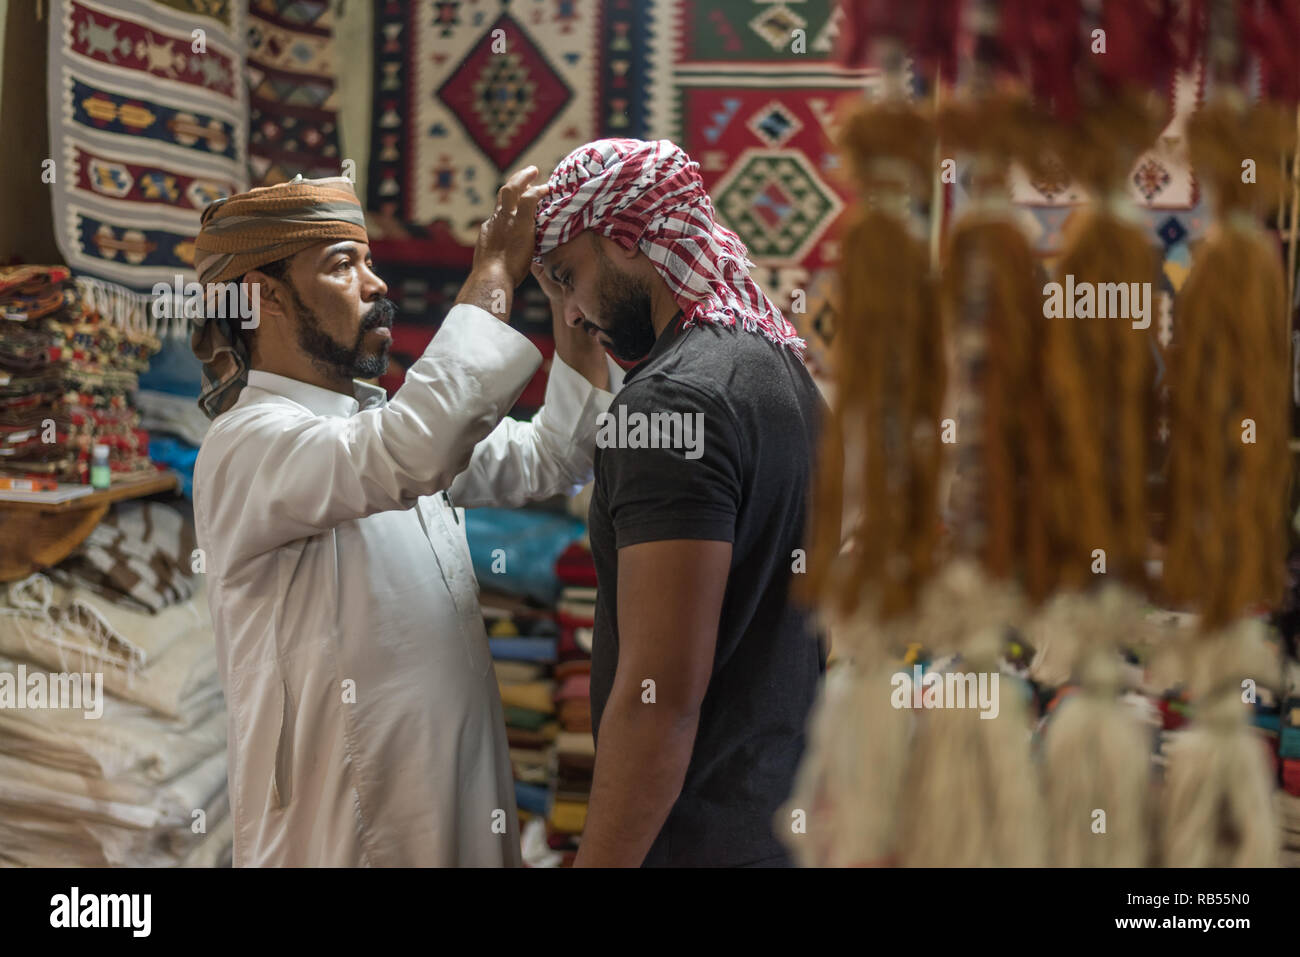 Portrait of a bedouin Arabic man helping another with wearing a head scarf bedouin style in Siwa Egypt Stock Photo